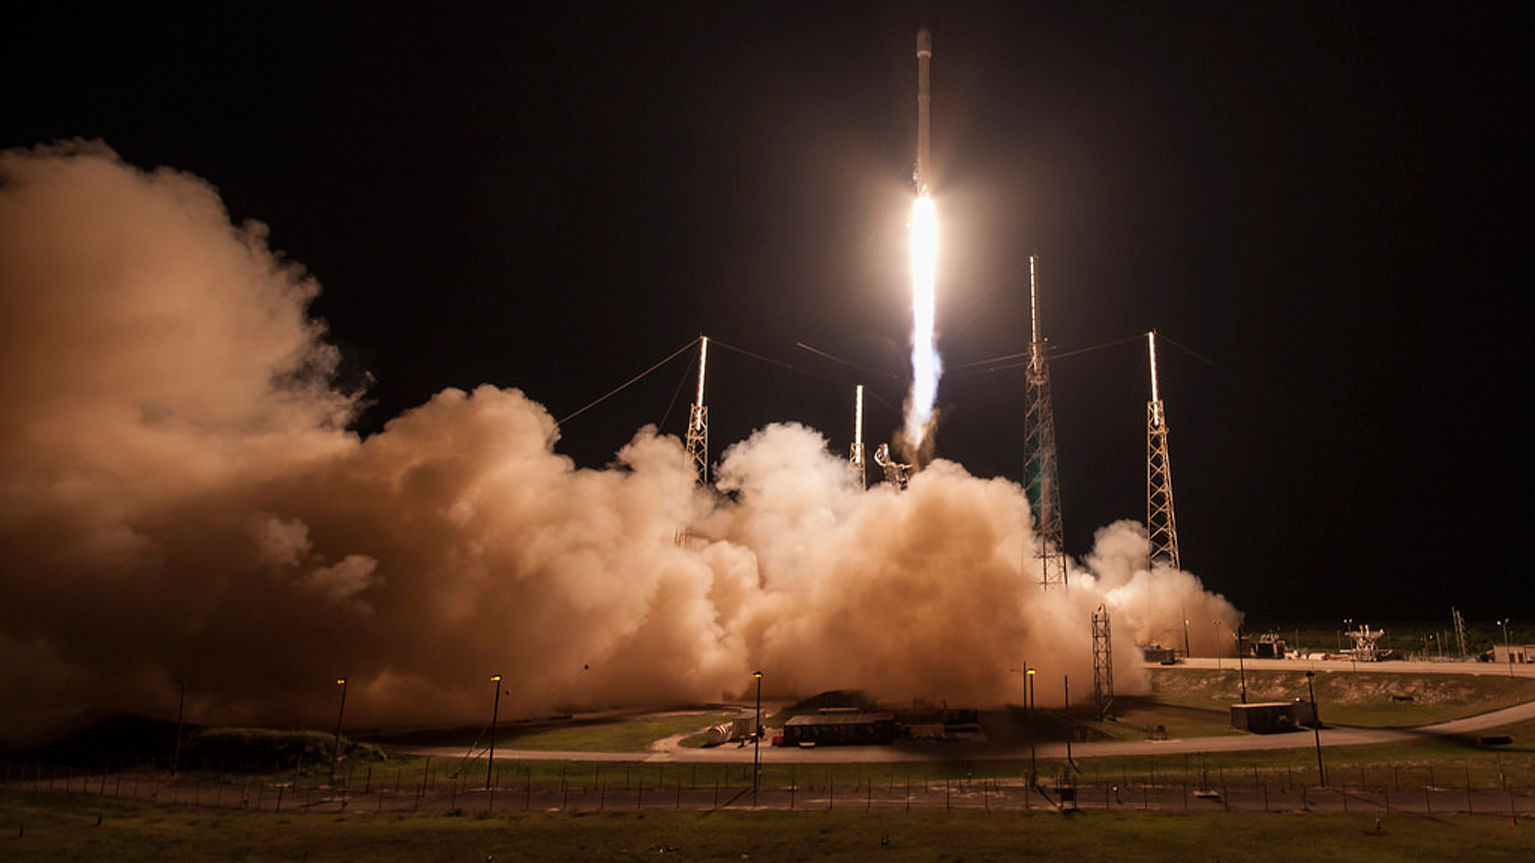 Launch of SpaceX carrying the JCSAT-14( Photo Courtesy: <a href="https://www.flickr.com/photos/spacex/26778141661/">Flickr</a>)